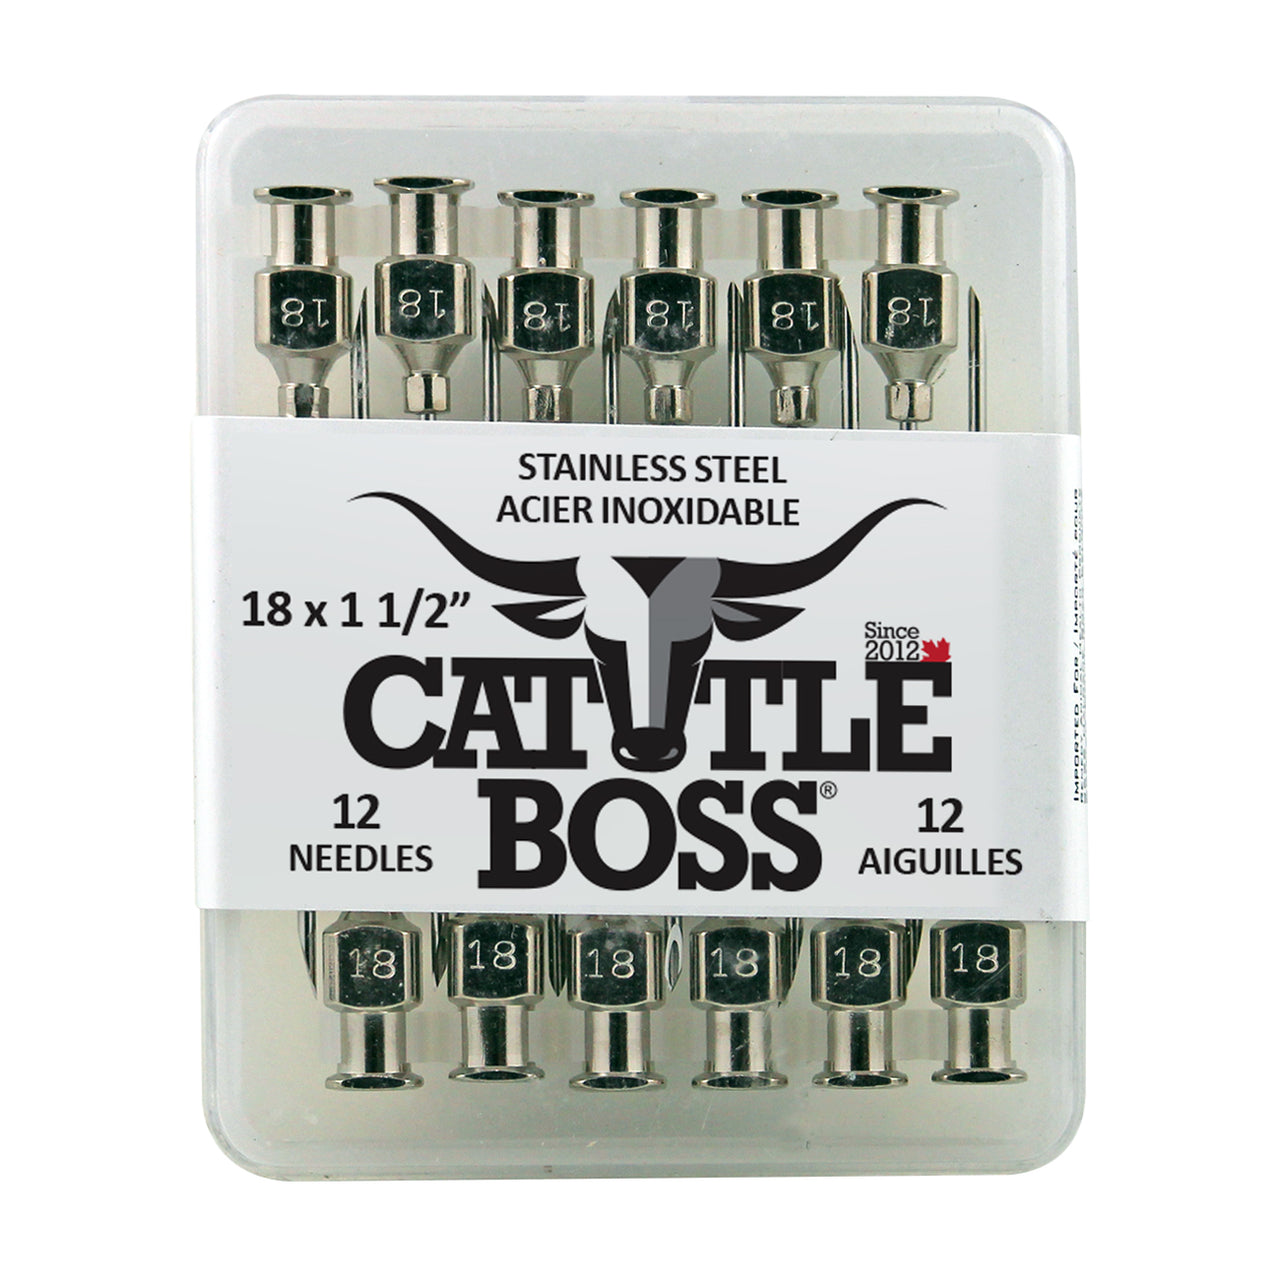 Cattle Boss Stainless Steel Hub Needle (12 Pack) 18X1 1/2 - Drug Administration Cattle Boss - Canada